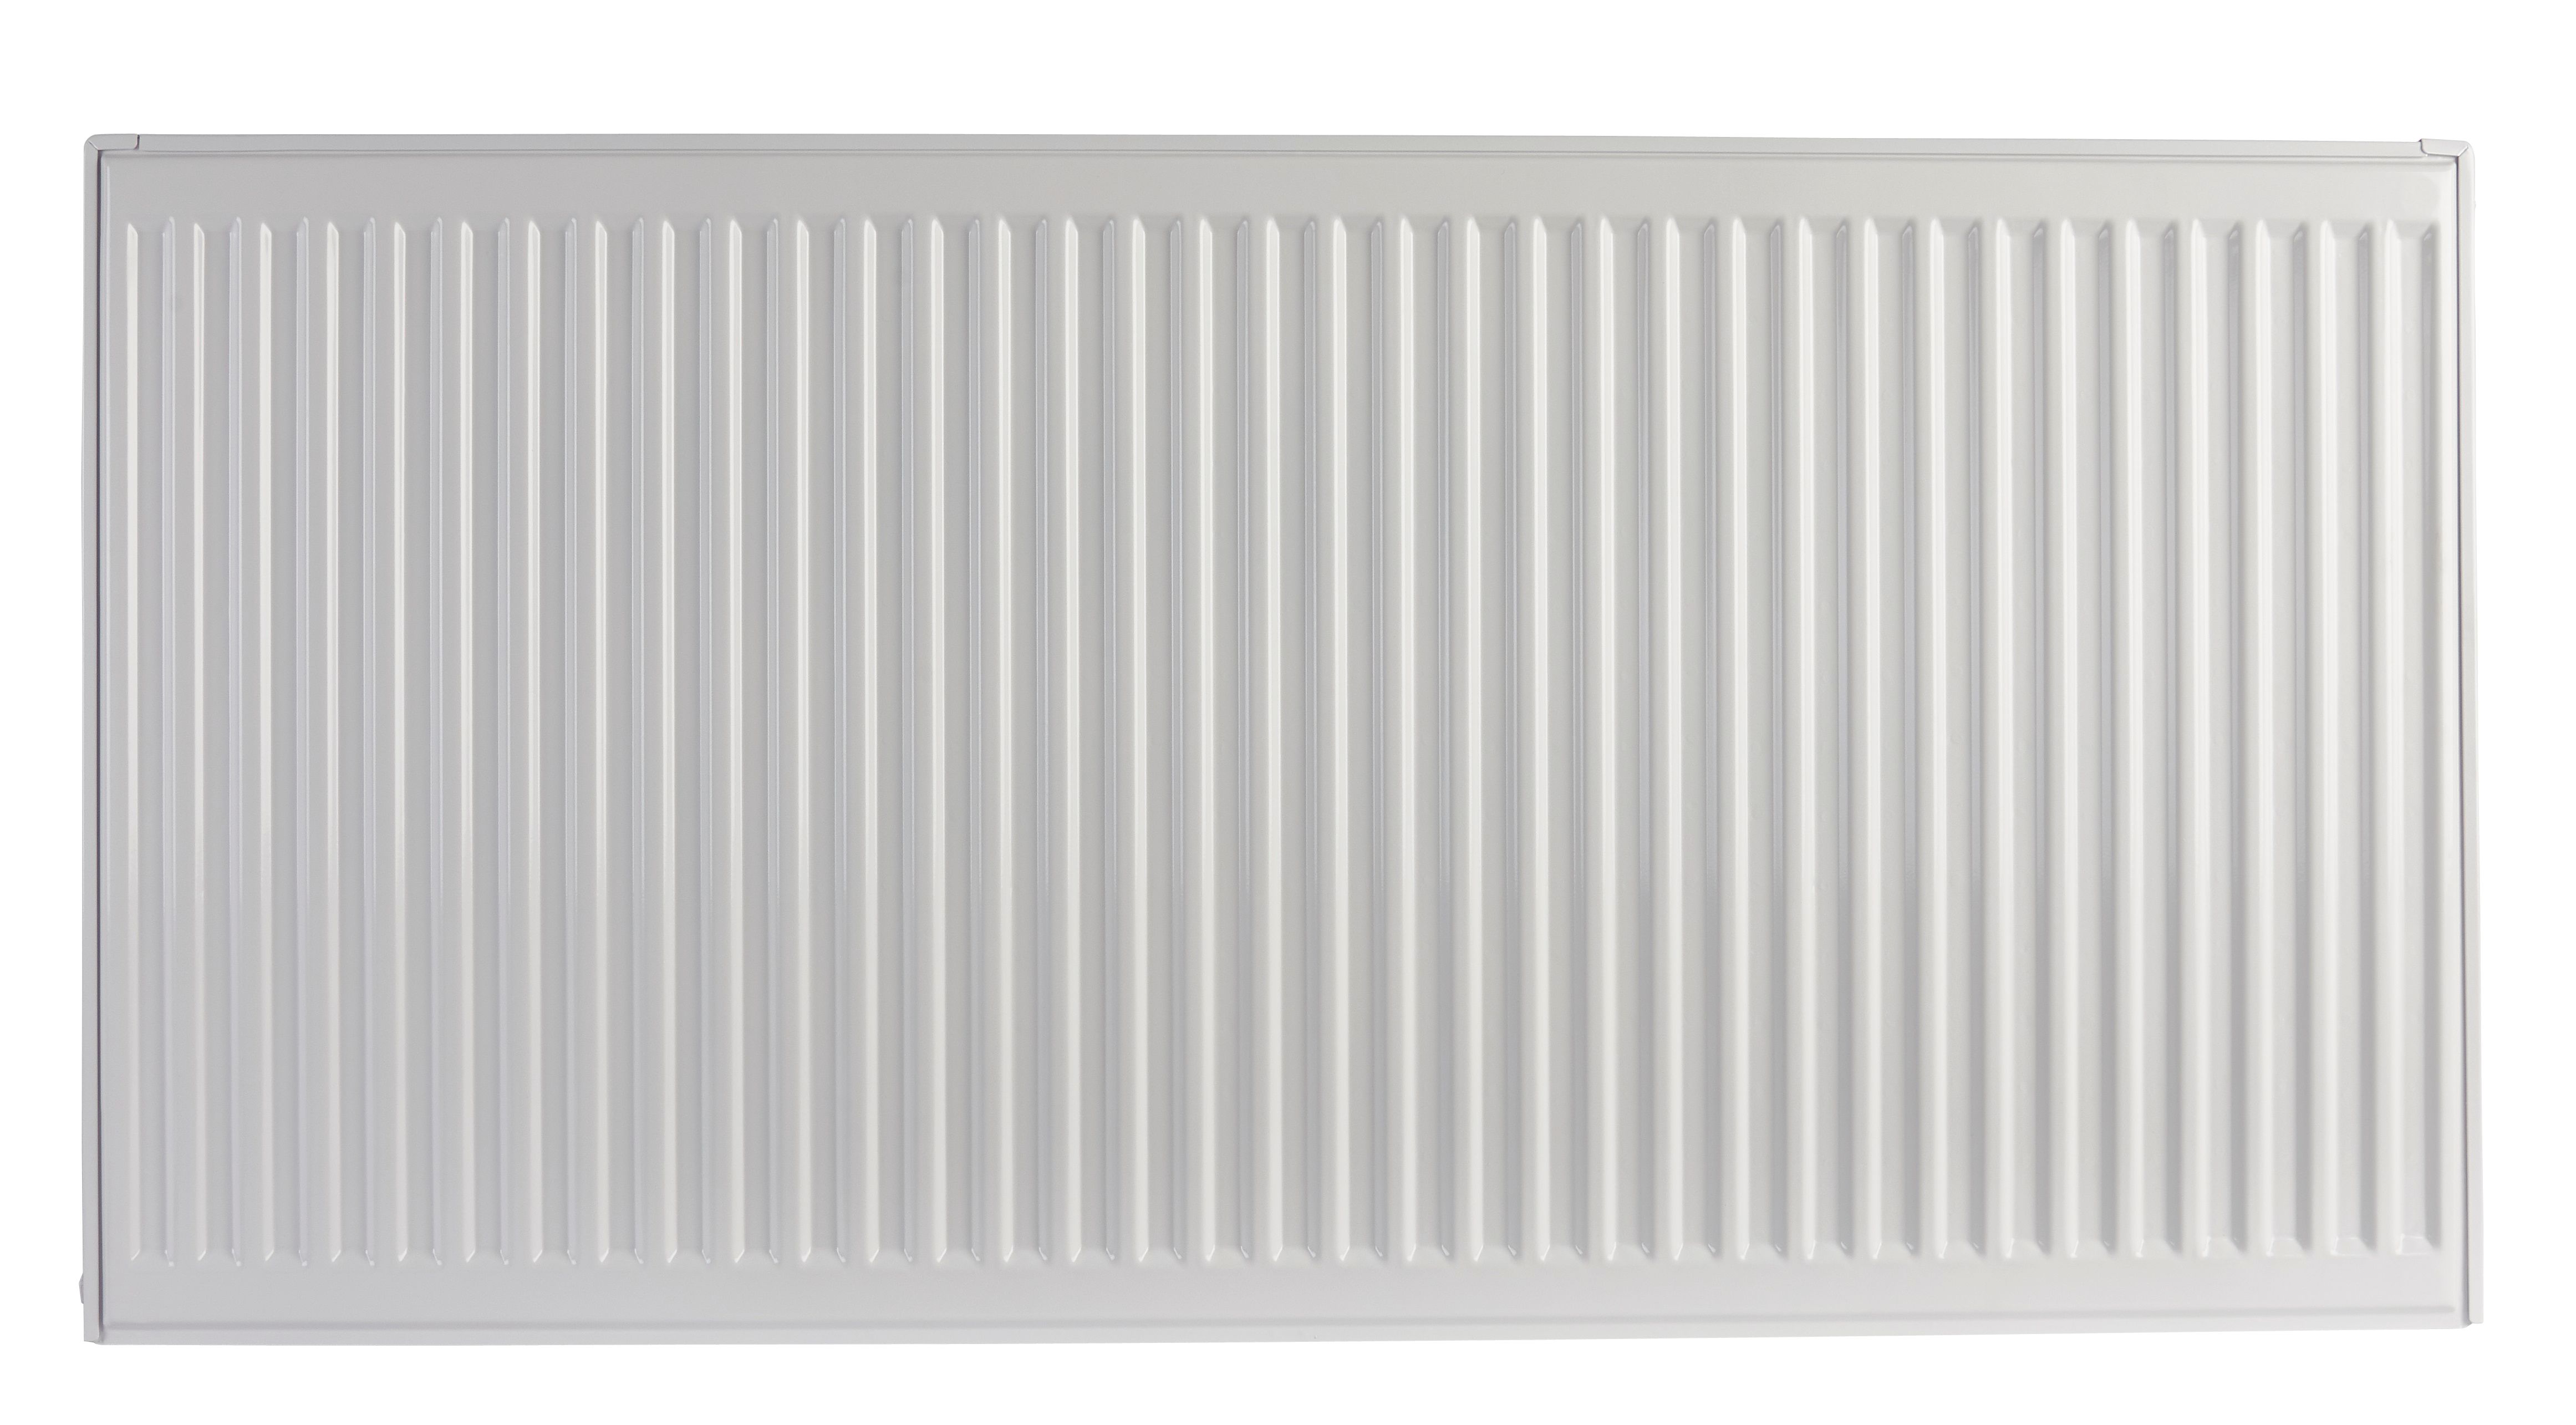 Image of Homeline by Stelrad 600 x 1400mm Type 11 Single Panel Single Convector Radiator